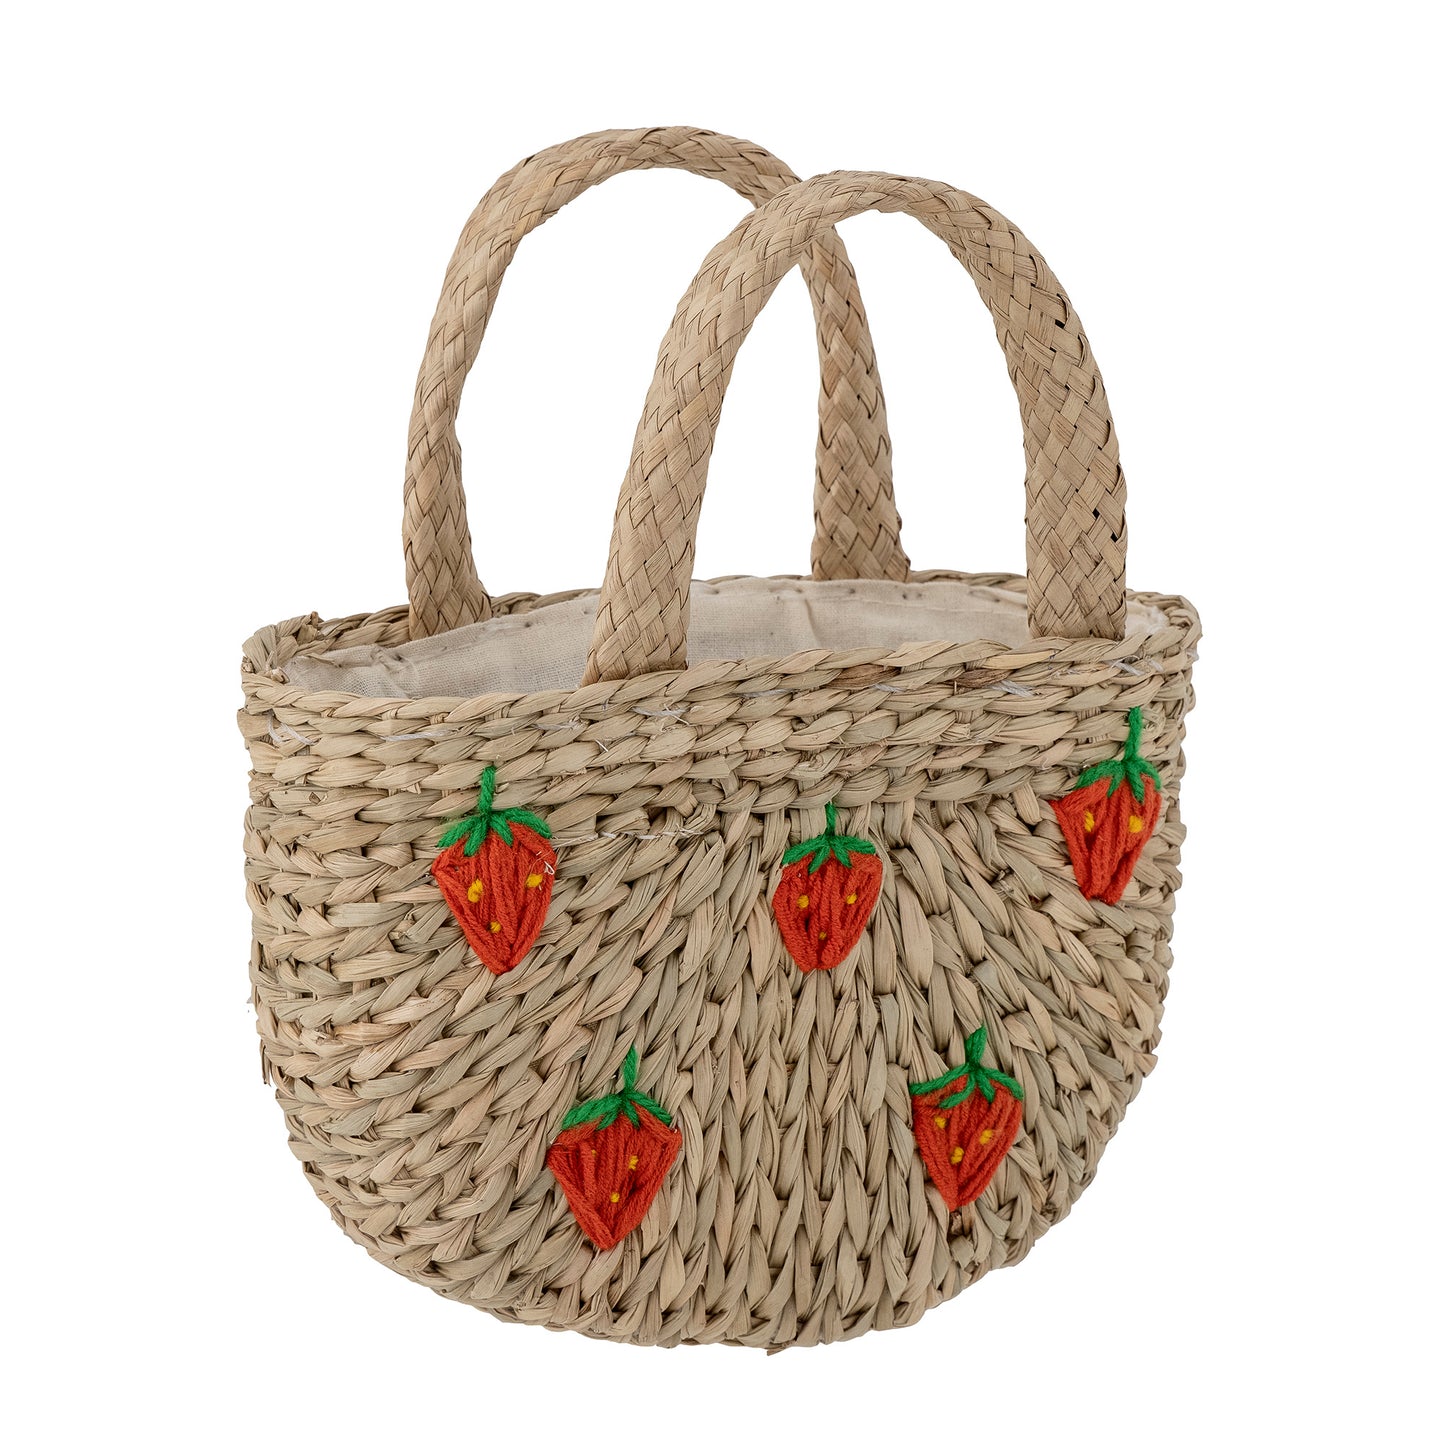 Anabell Bag - Strawberry Seagrass